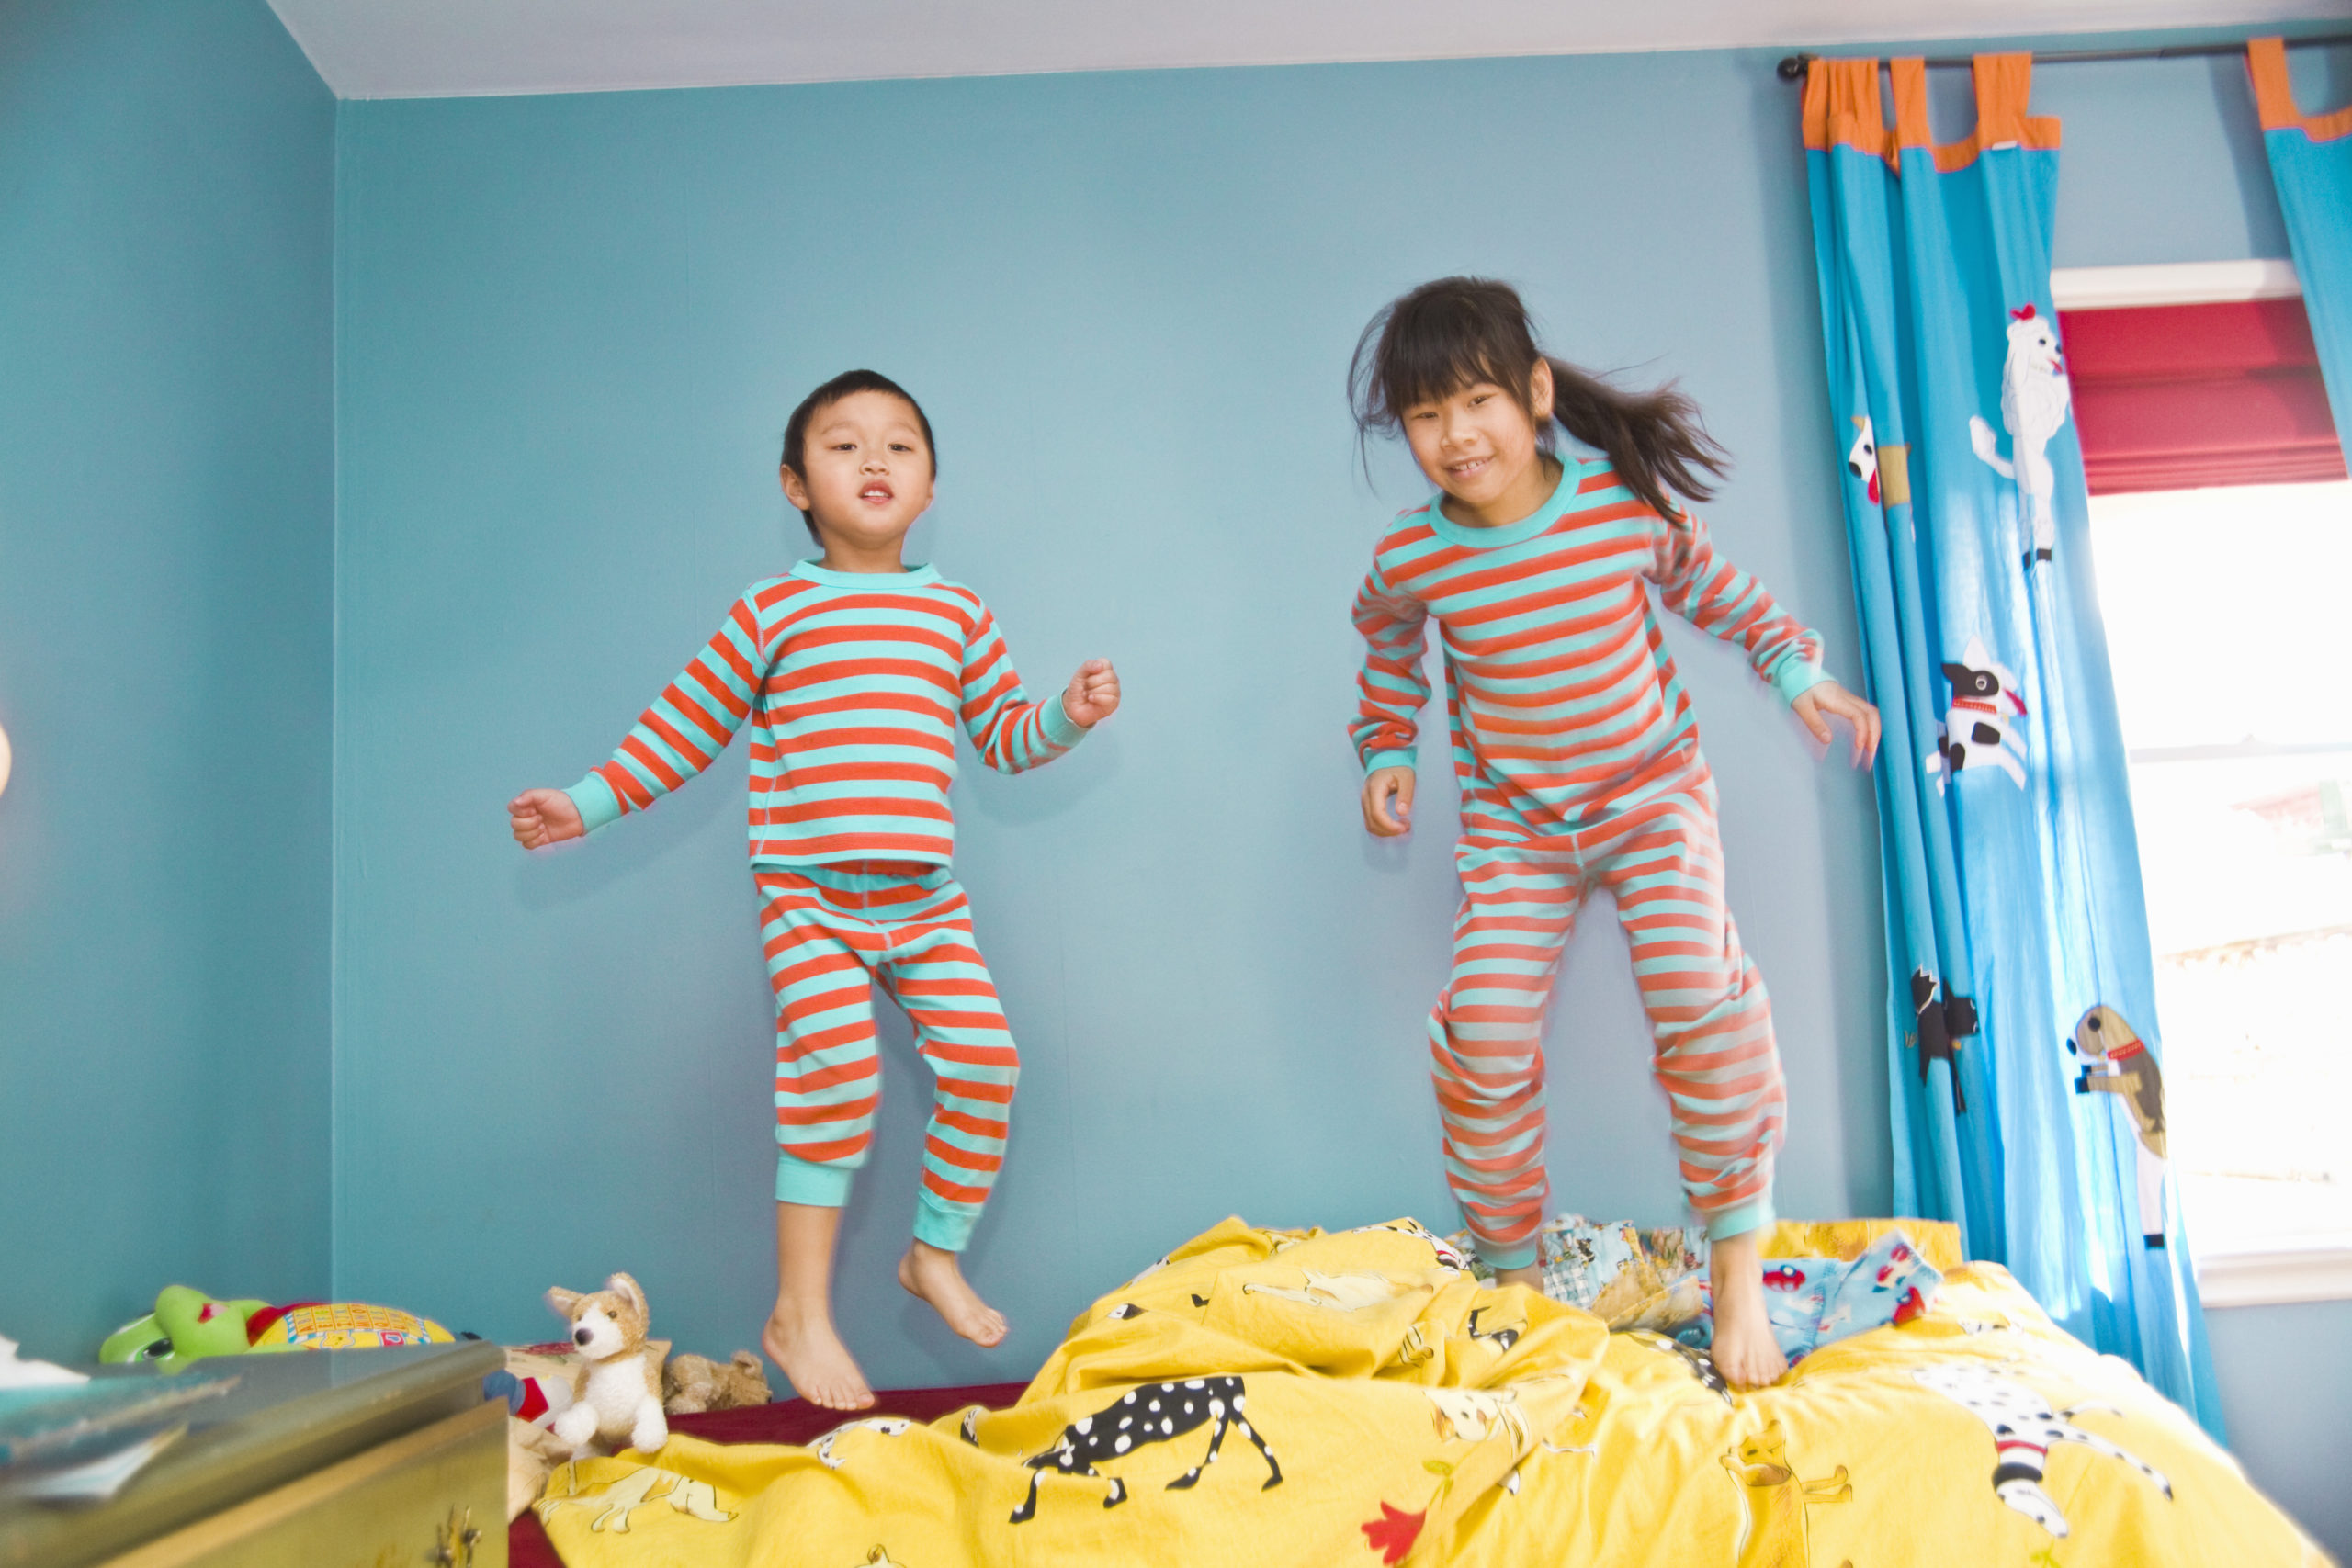 Kids with combined-type ADHD expend some energy jumping on the bed.